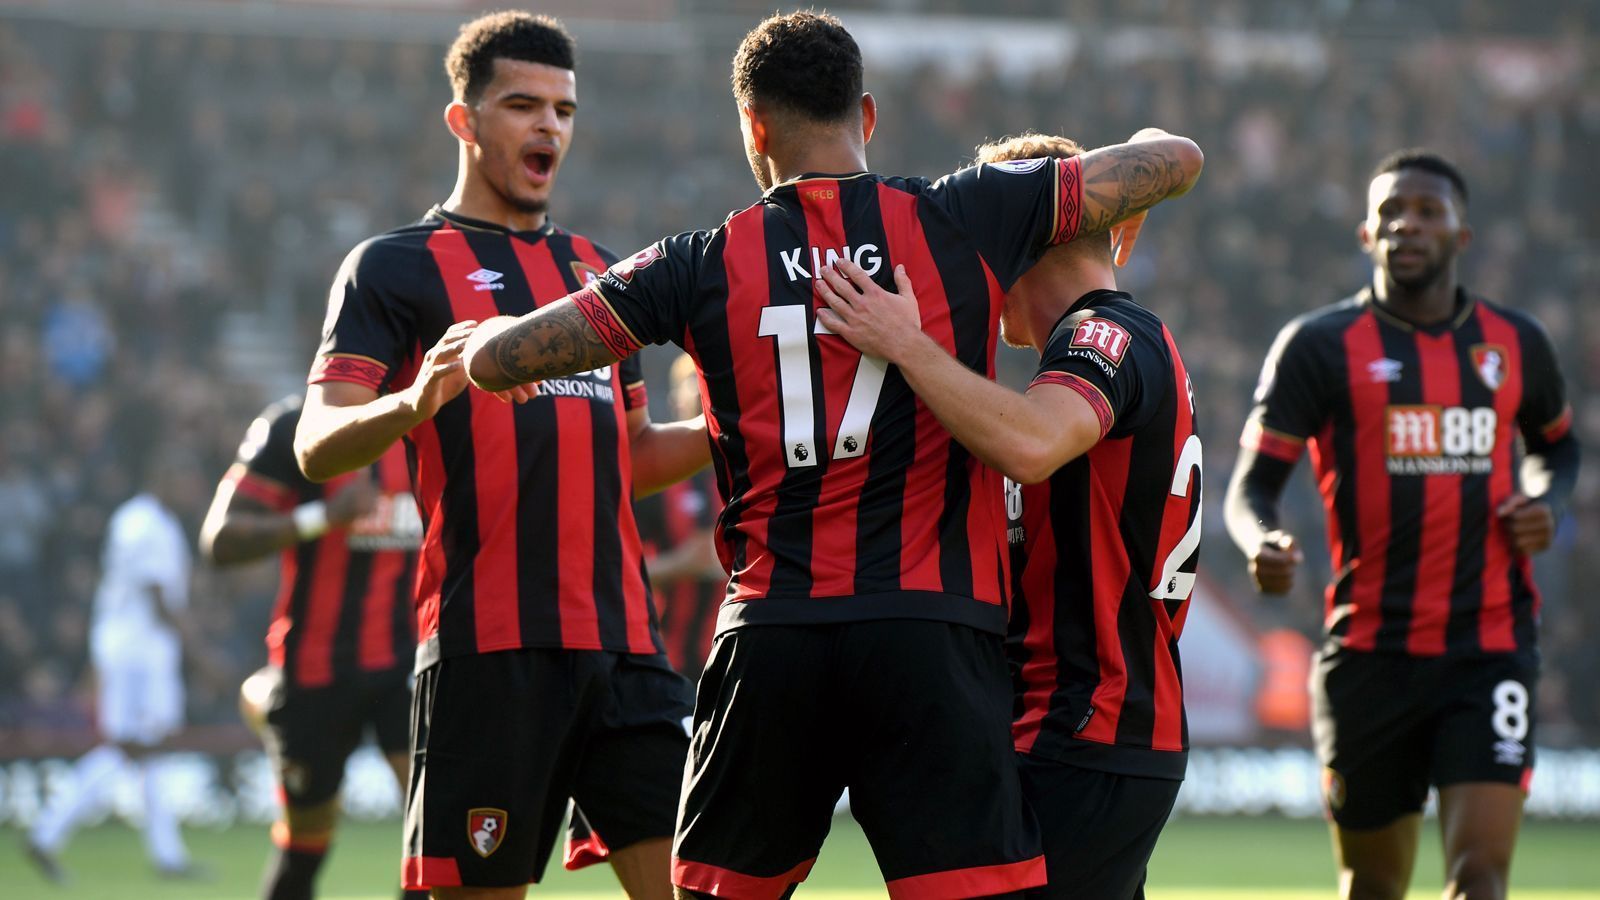 
                <strong>Platz 11 - AFC Bournemouth</strong><br>
                Berater-Honorare: 11,97 Millionen Euro
              